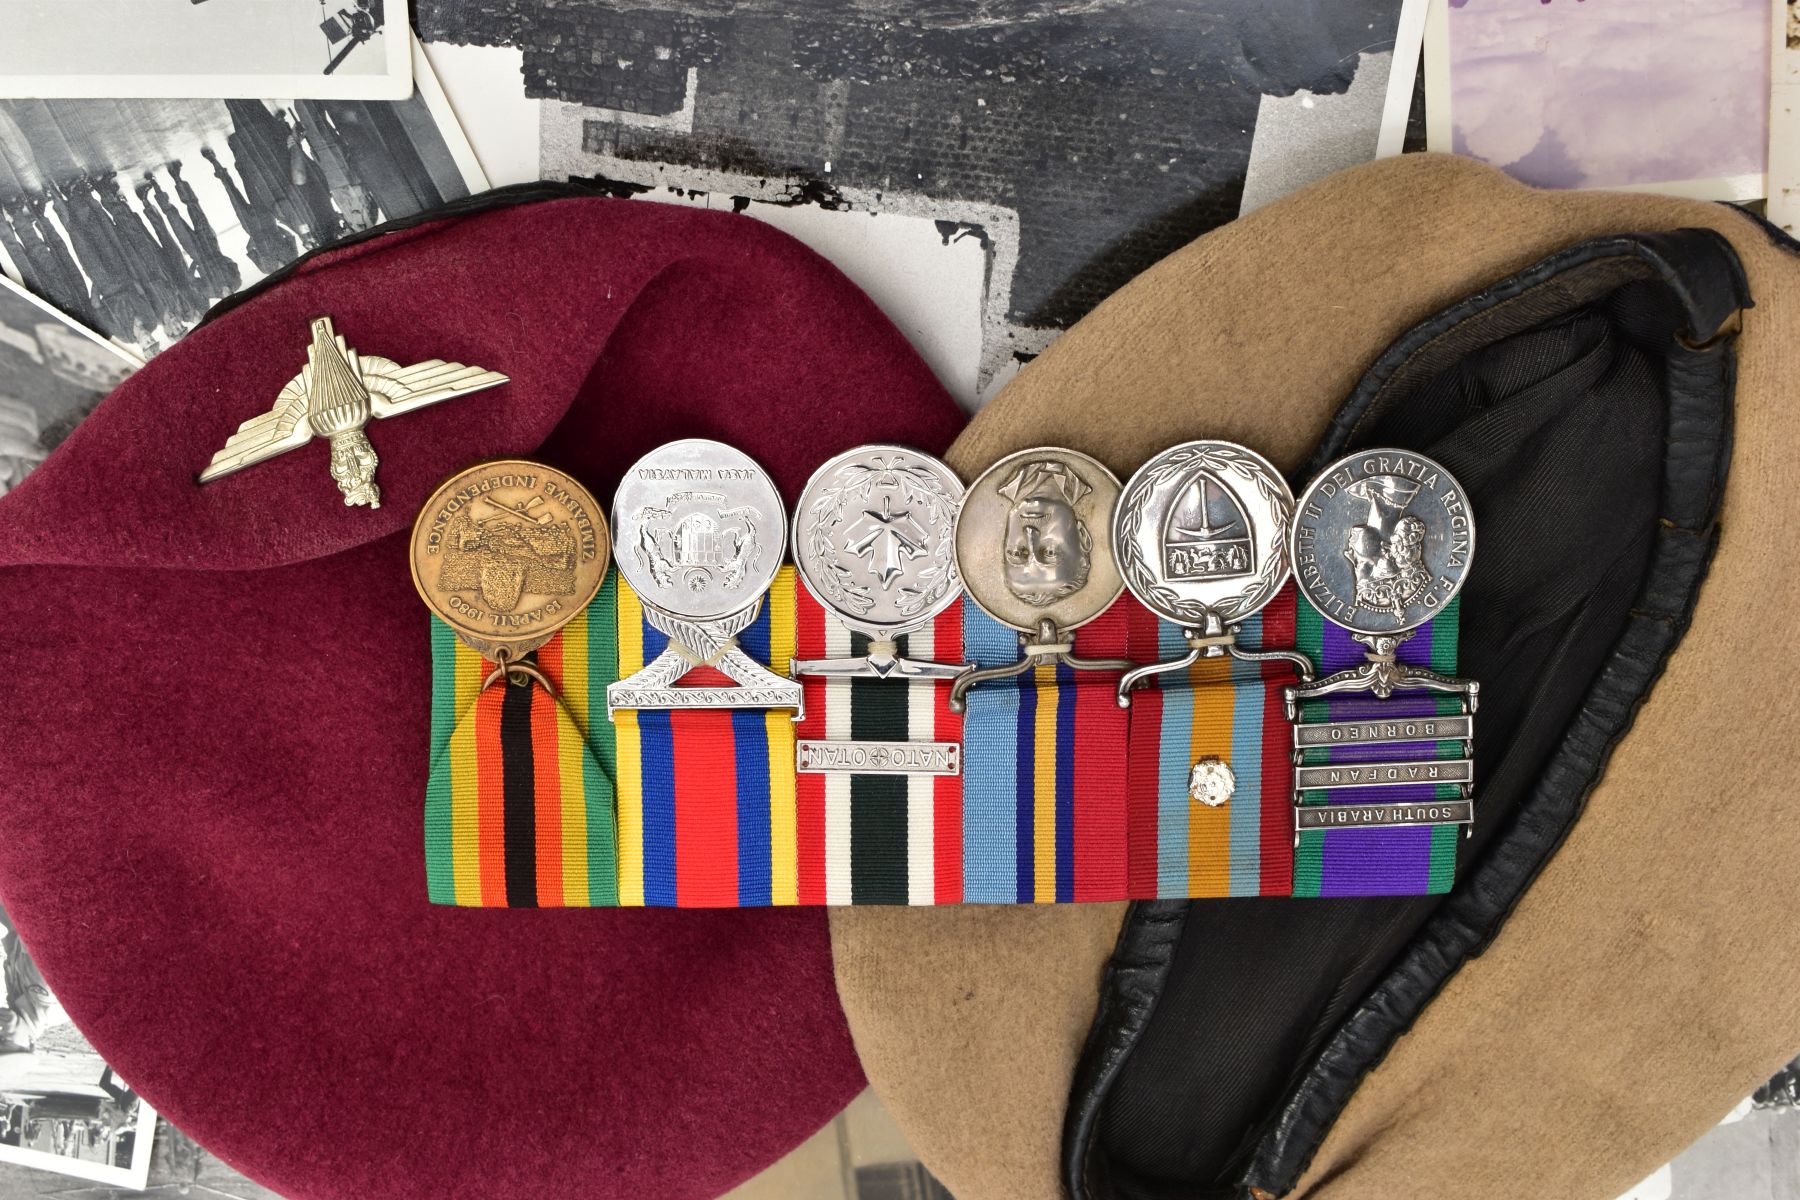 A UNIQUE GROUP OF SIX MEDALS to Roger Brian Carden TATTERSALL, born 30th June 1938, a member of - Image 14 of 37